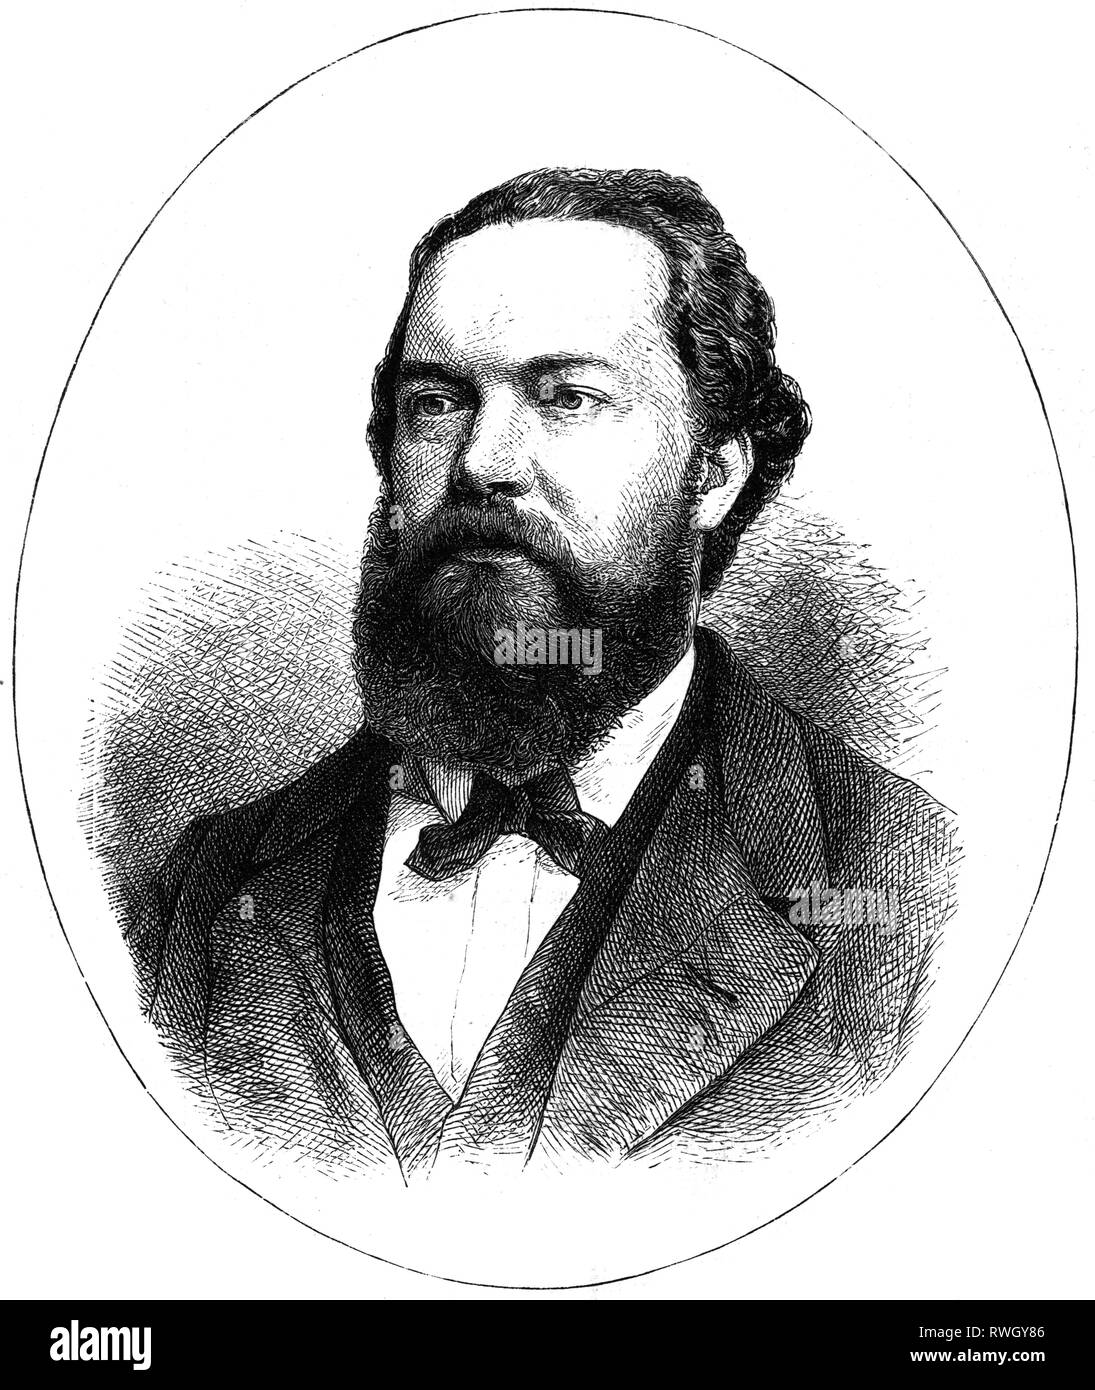 Richter, Eugene, 30.7.1838 - 10.3.1906, German journalist and politician, portrait, wood engraving, circa 1885, Artist's Copyright has not to be cleared Stock Photo